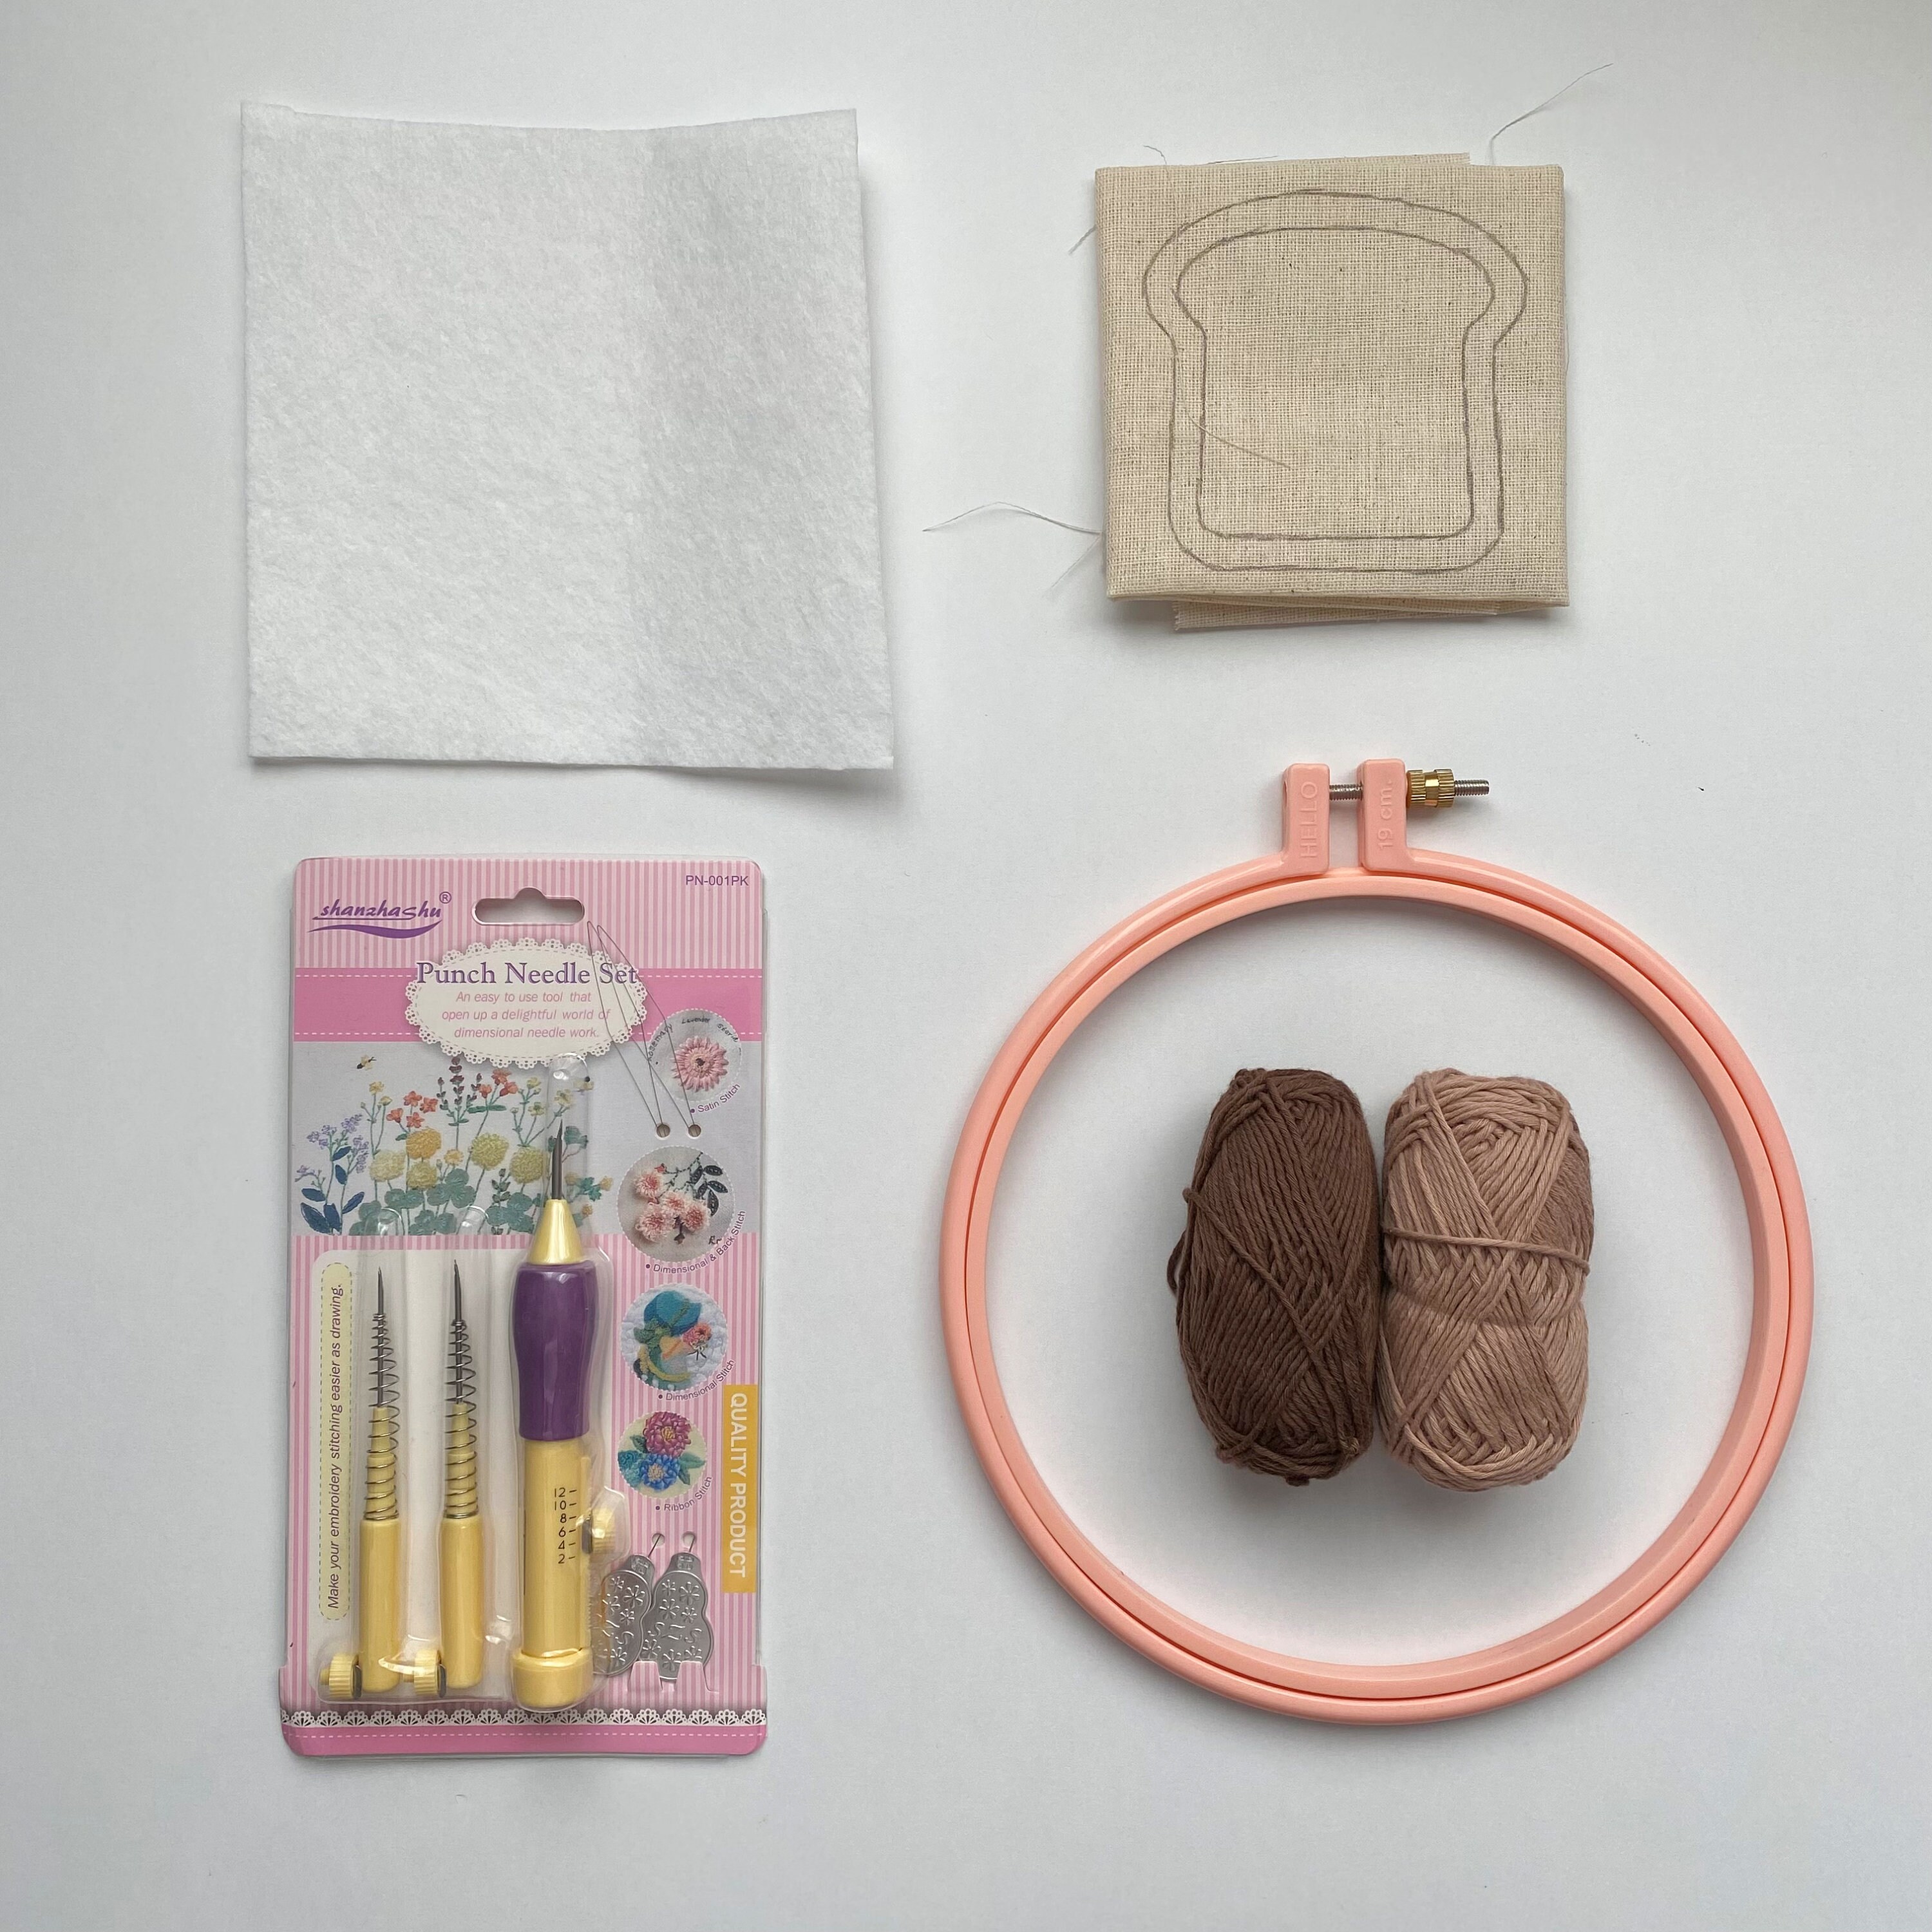 Ultra Punch Needle Kit Punch Needle Embroidery Set With 